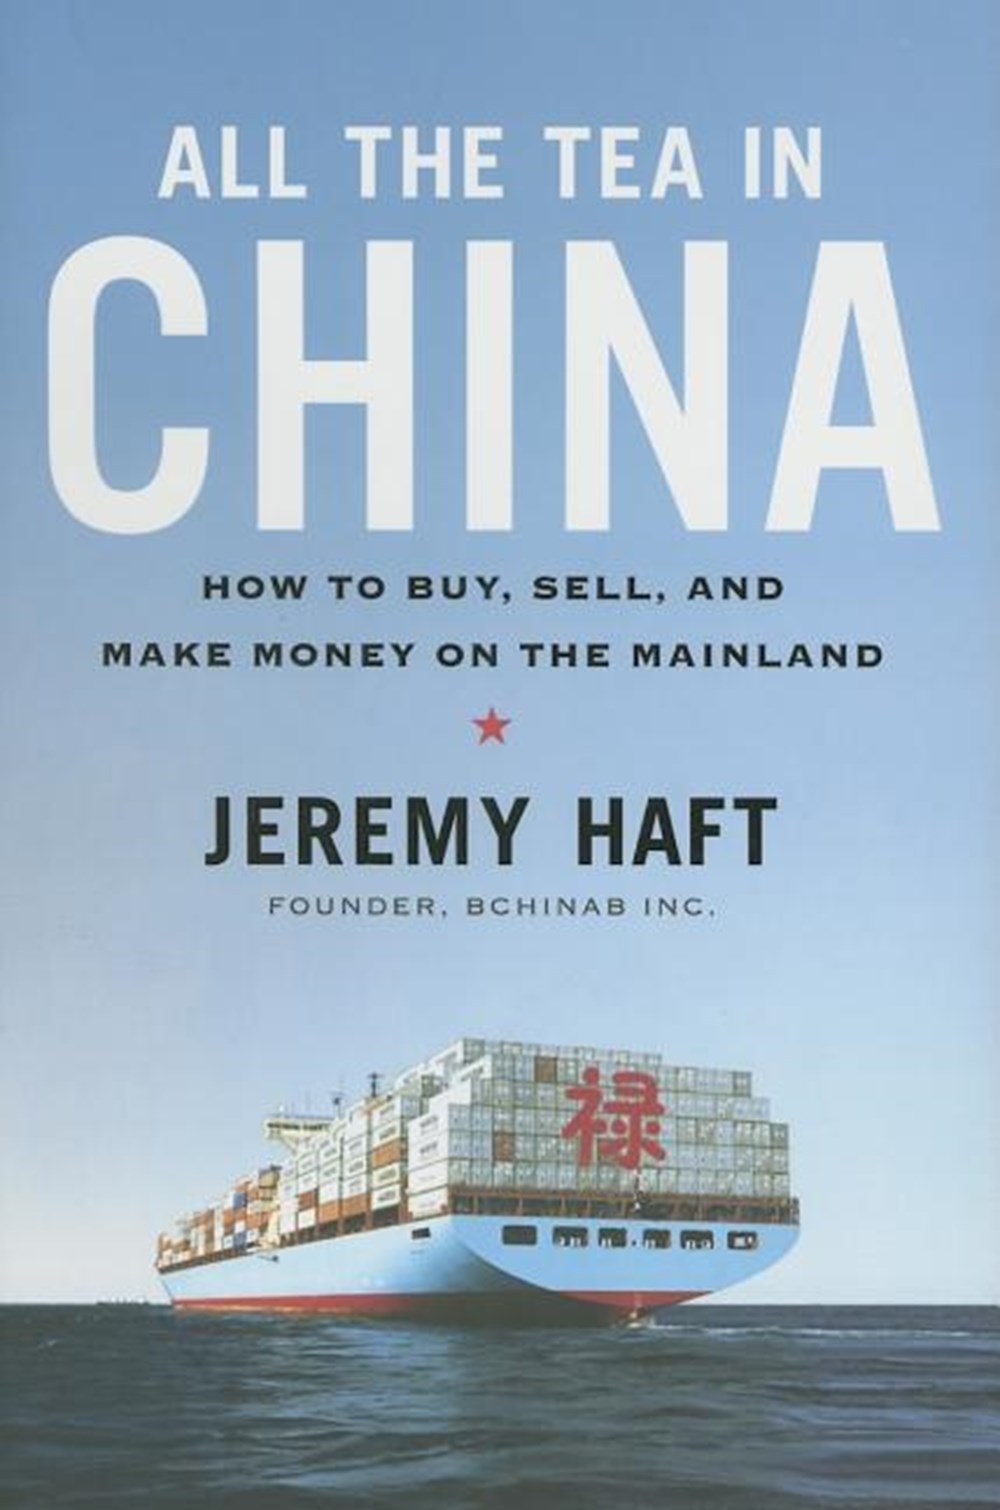 All the Tea in China: How to Buy, Sell, and Make Money on the Mainland